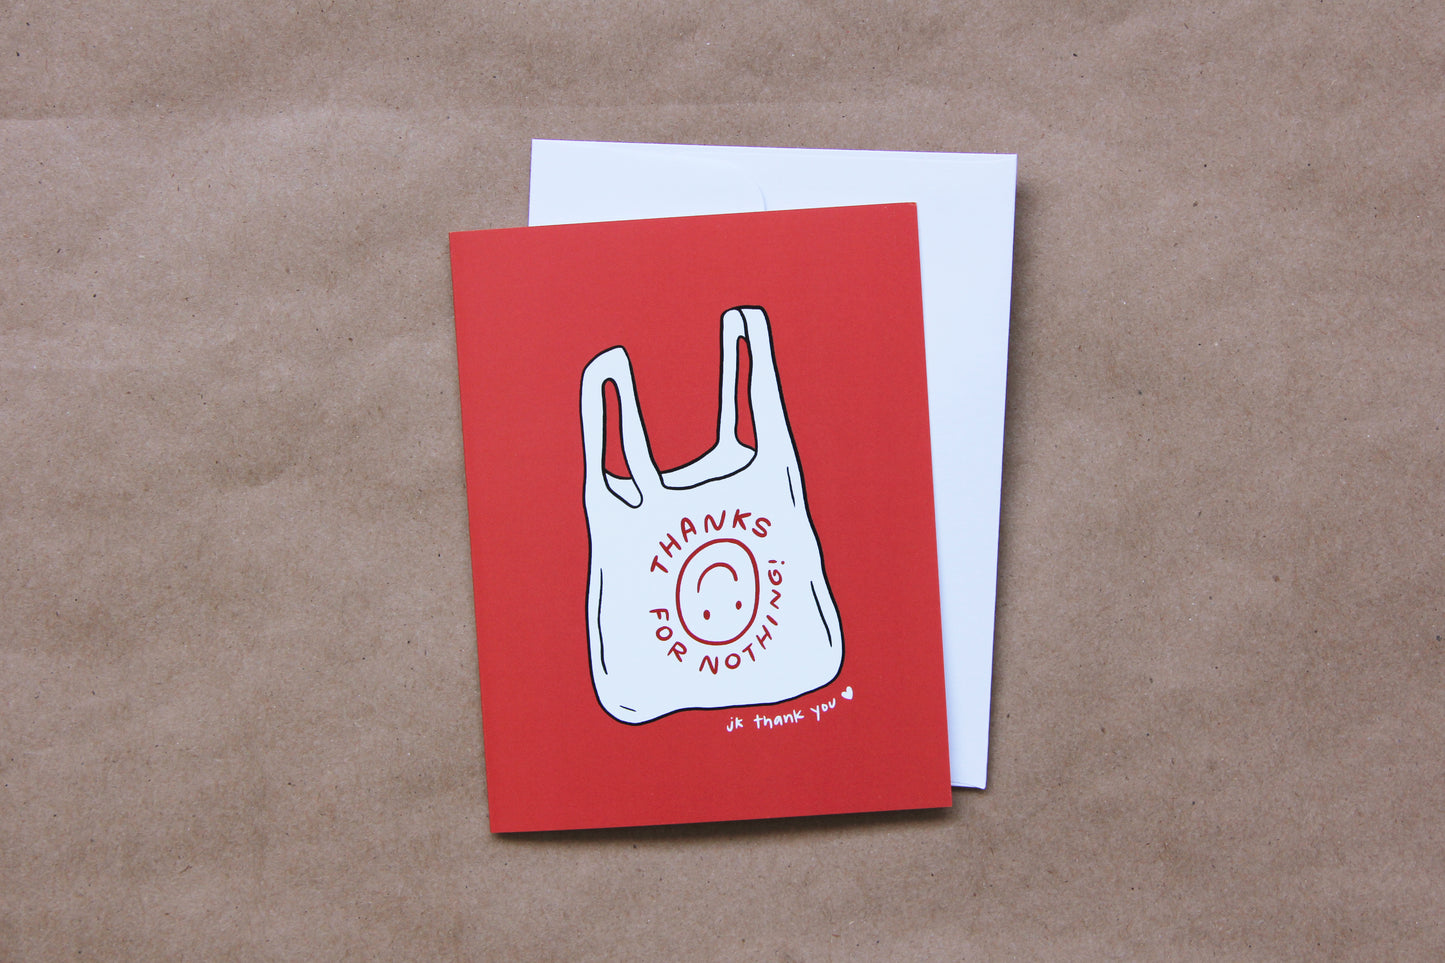 A photo of a red greeting card with a takeout bag that says "Thanks For Nothing jk thank you <3" and a white envelope on a tan background.